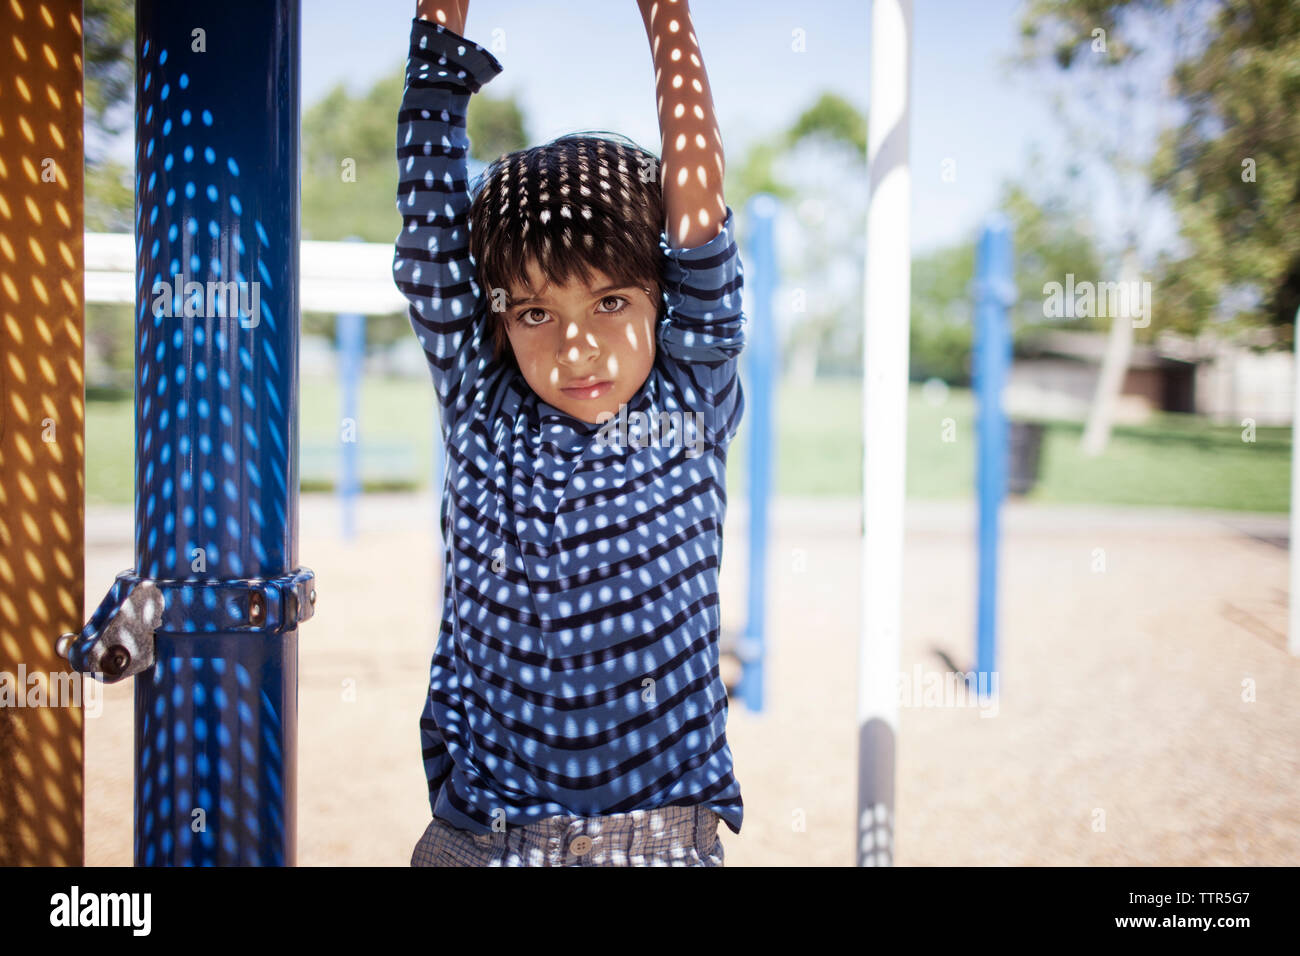 Portrait of boy hanging from outdoor play equipment at playground Stock Photo